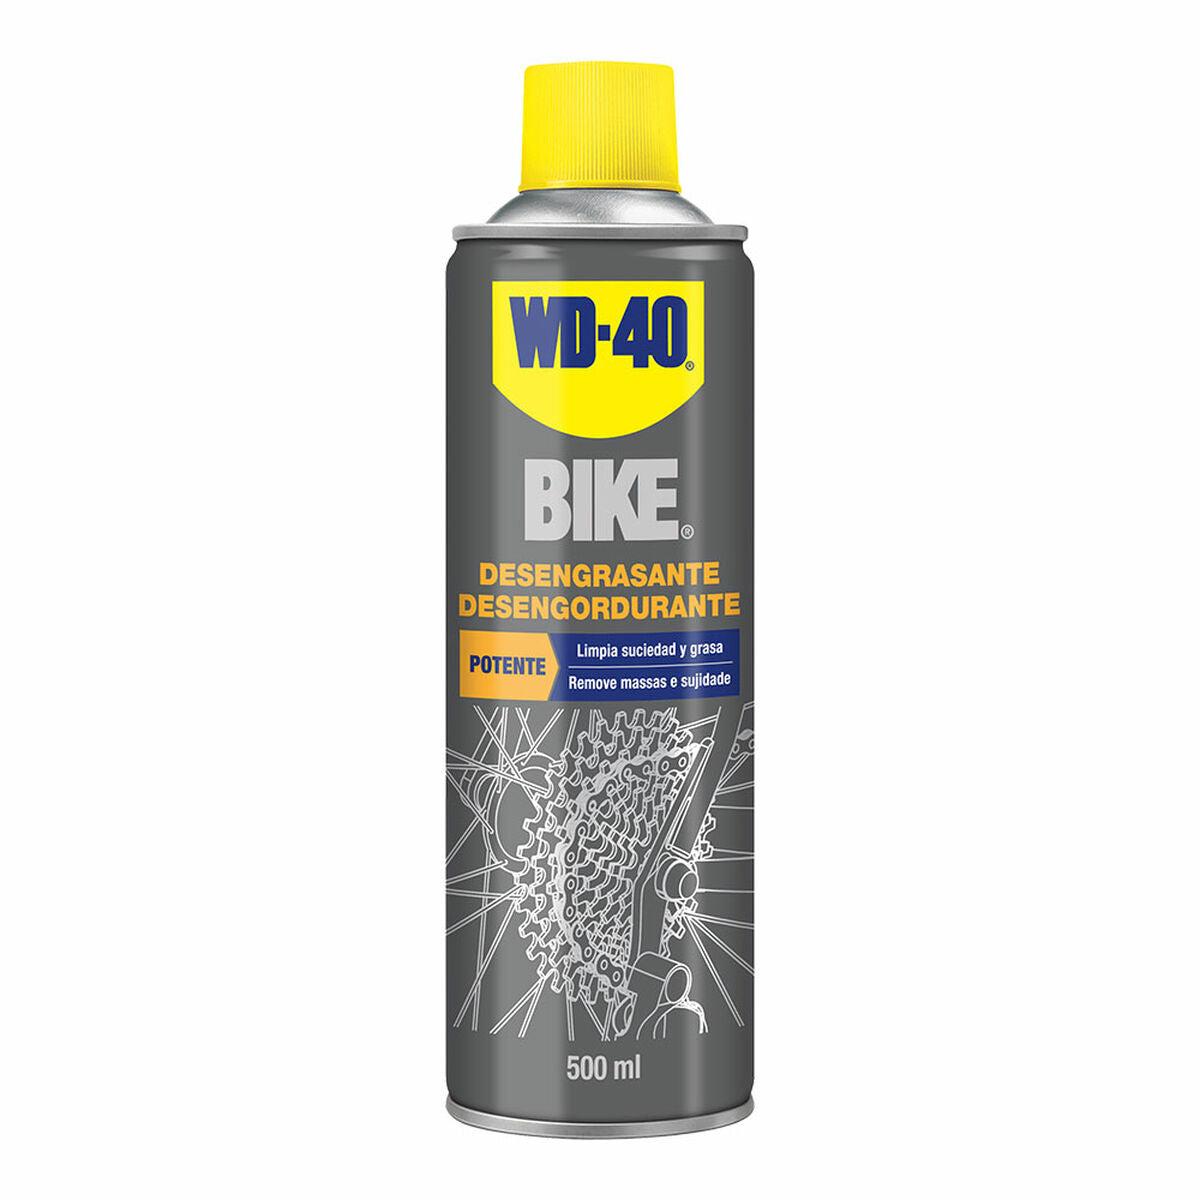 Bicycle cleaning kit WD-40 Specialist Bike - All Conditions  34877 2 Pieces